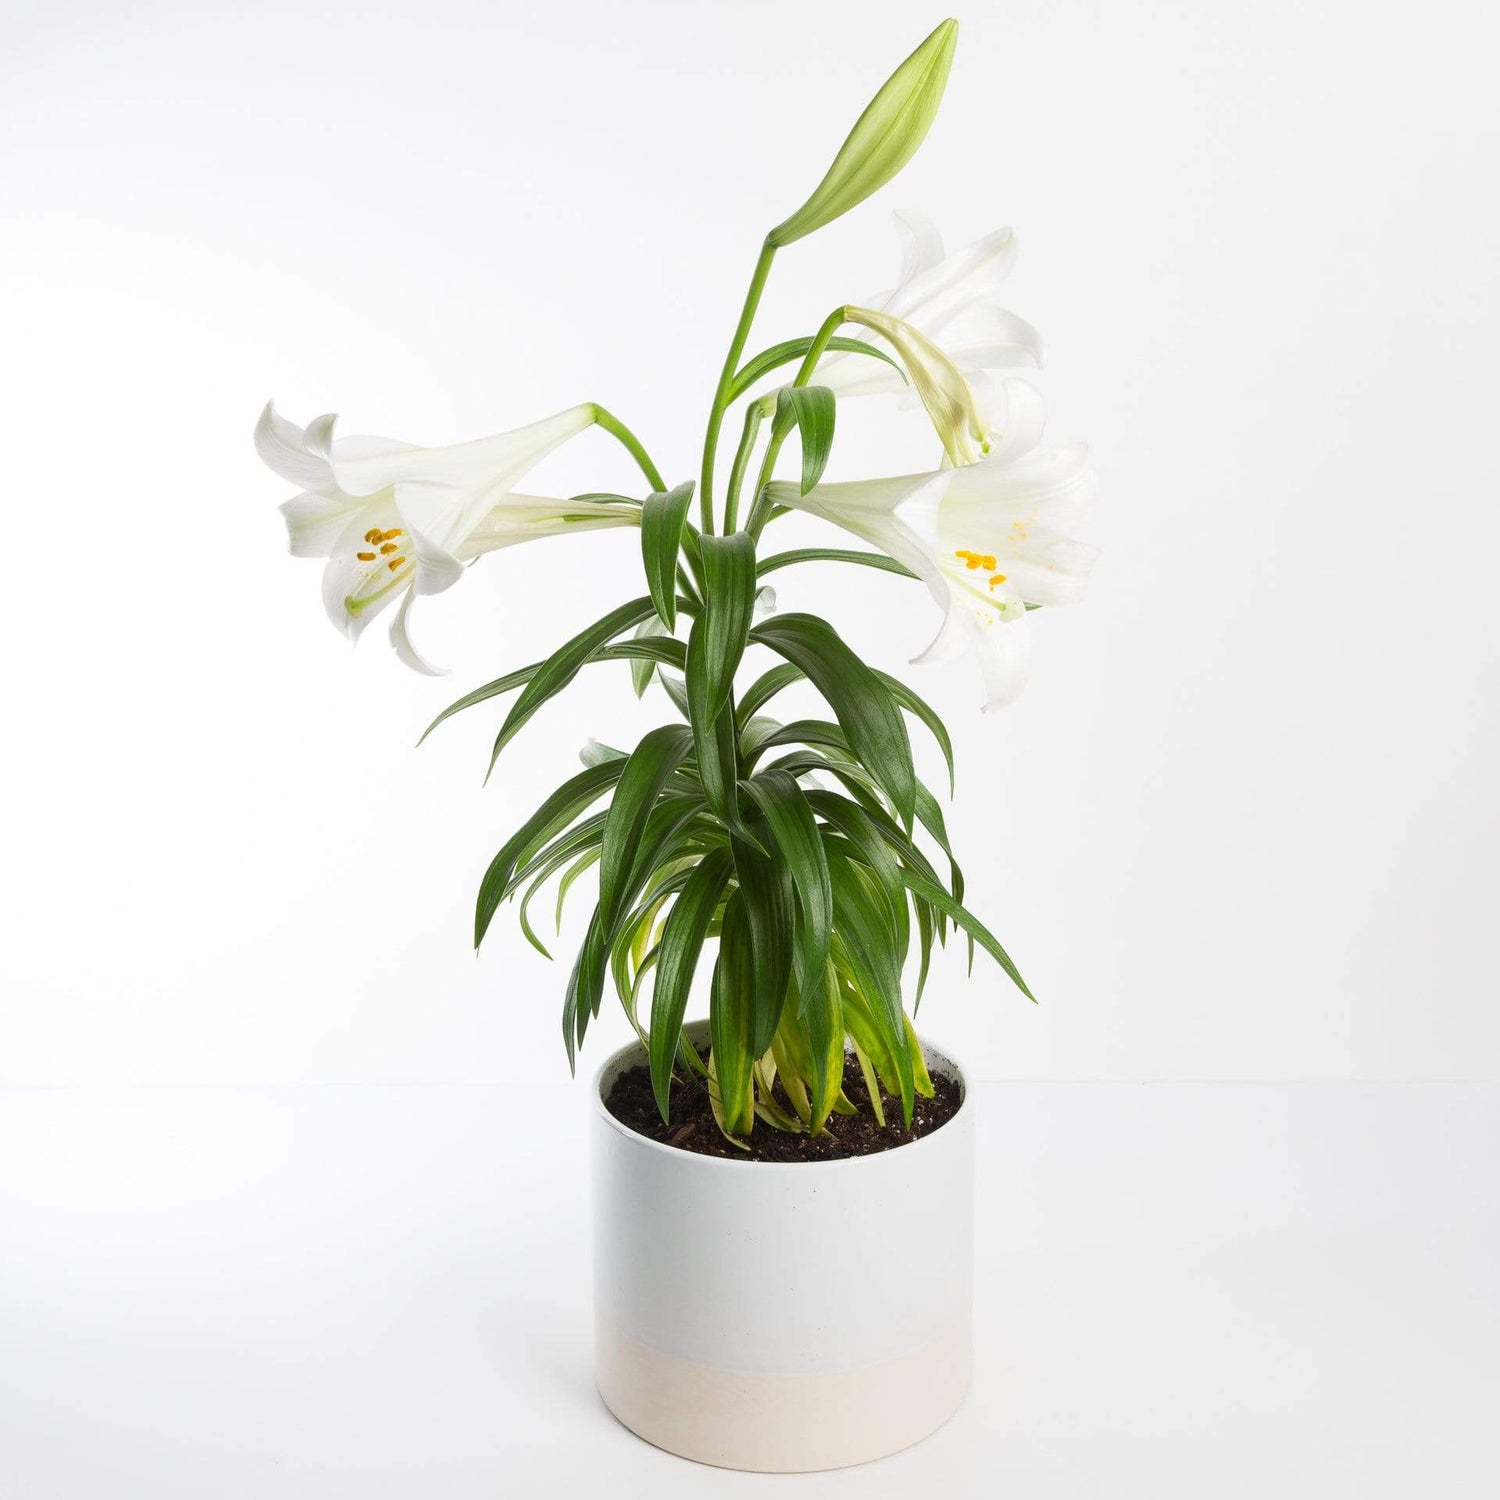 Urban Sprouts Plant 6" in nursery pot Easter Lily